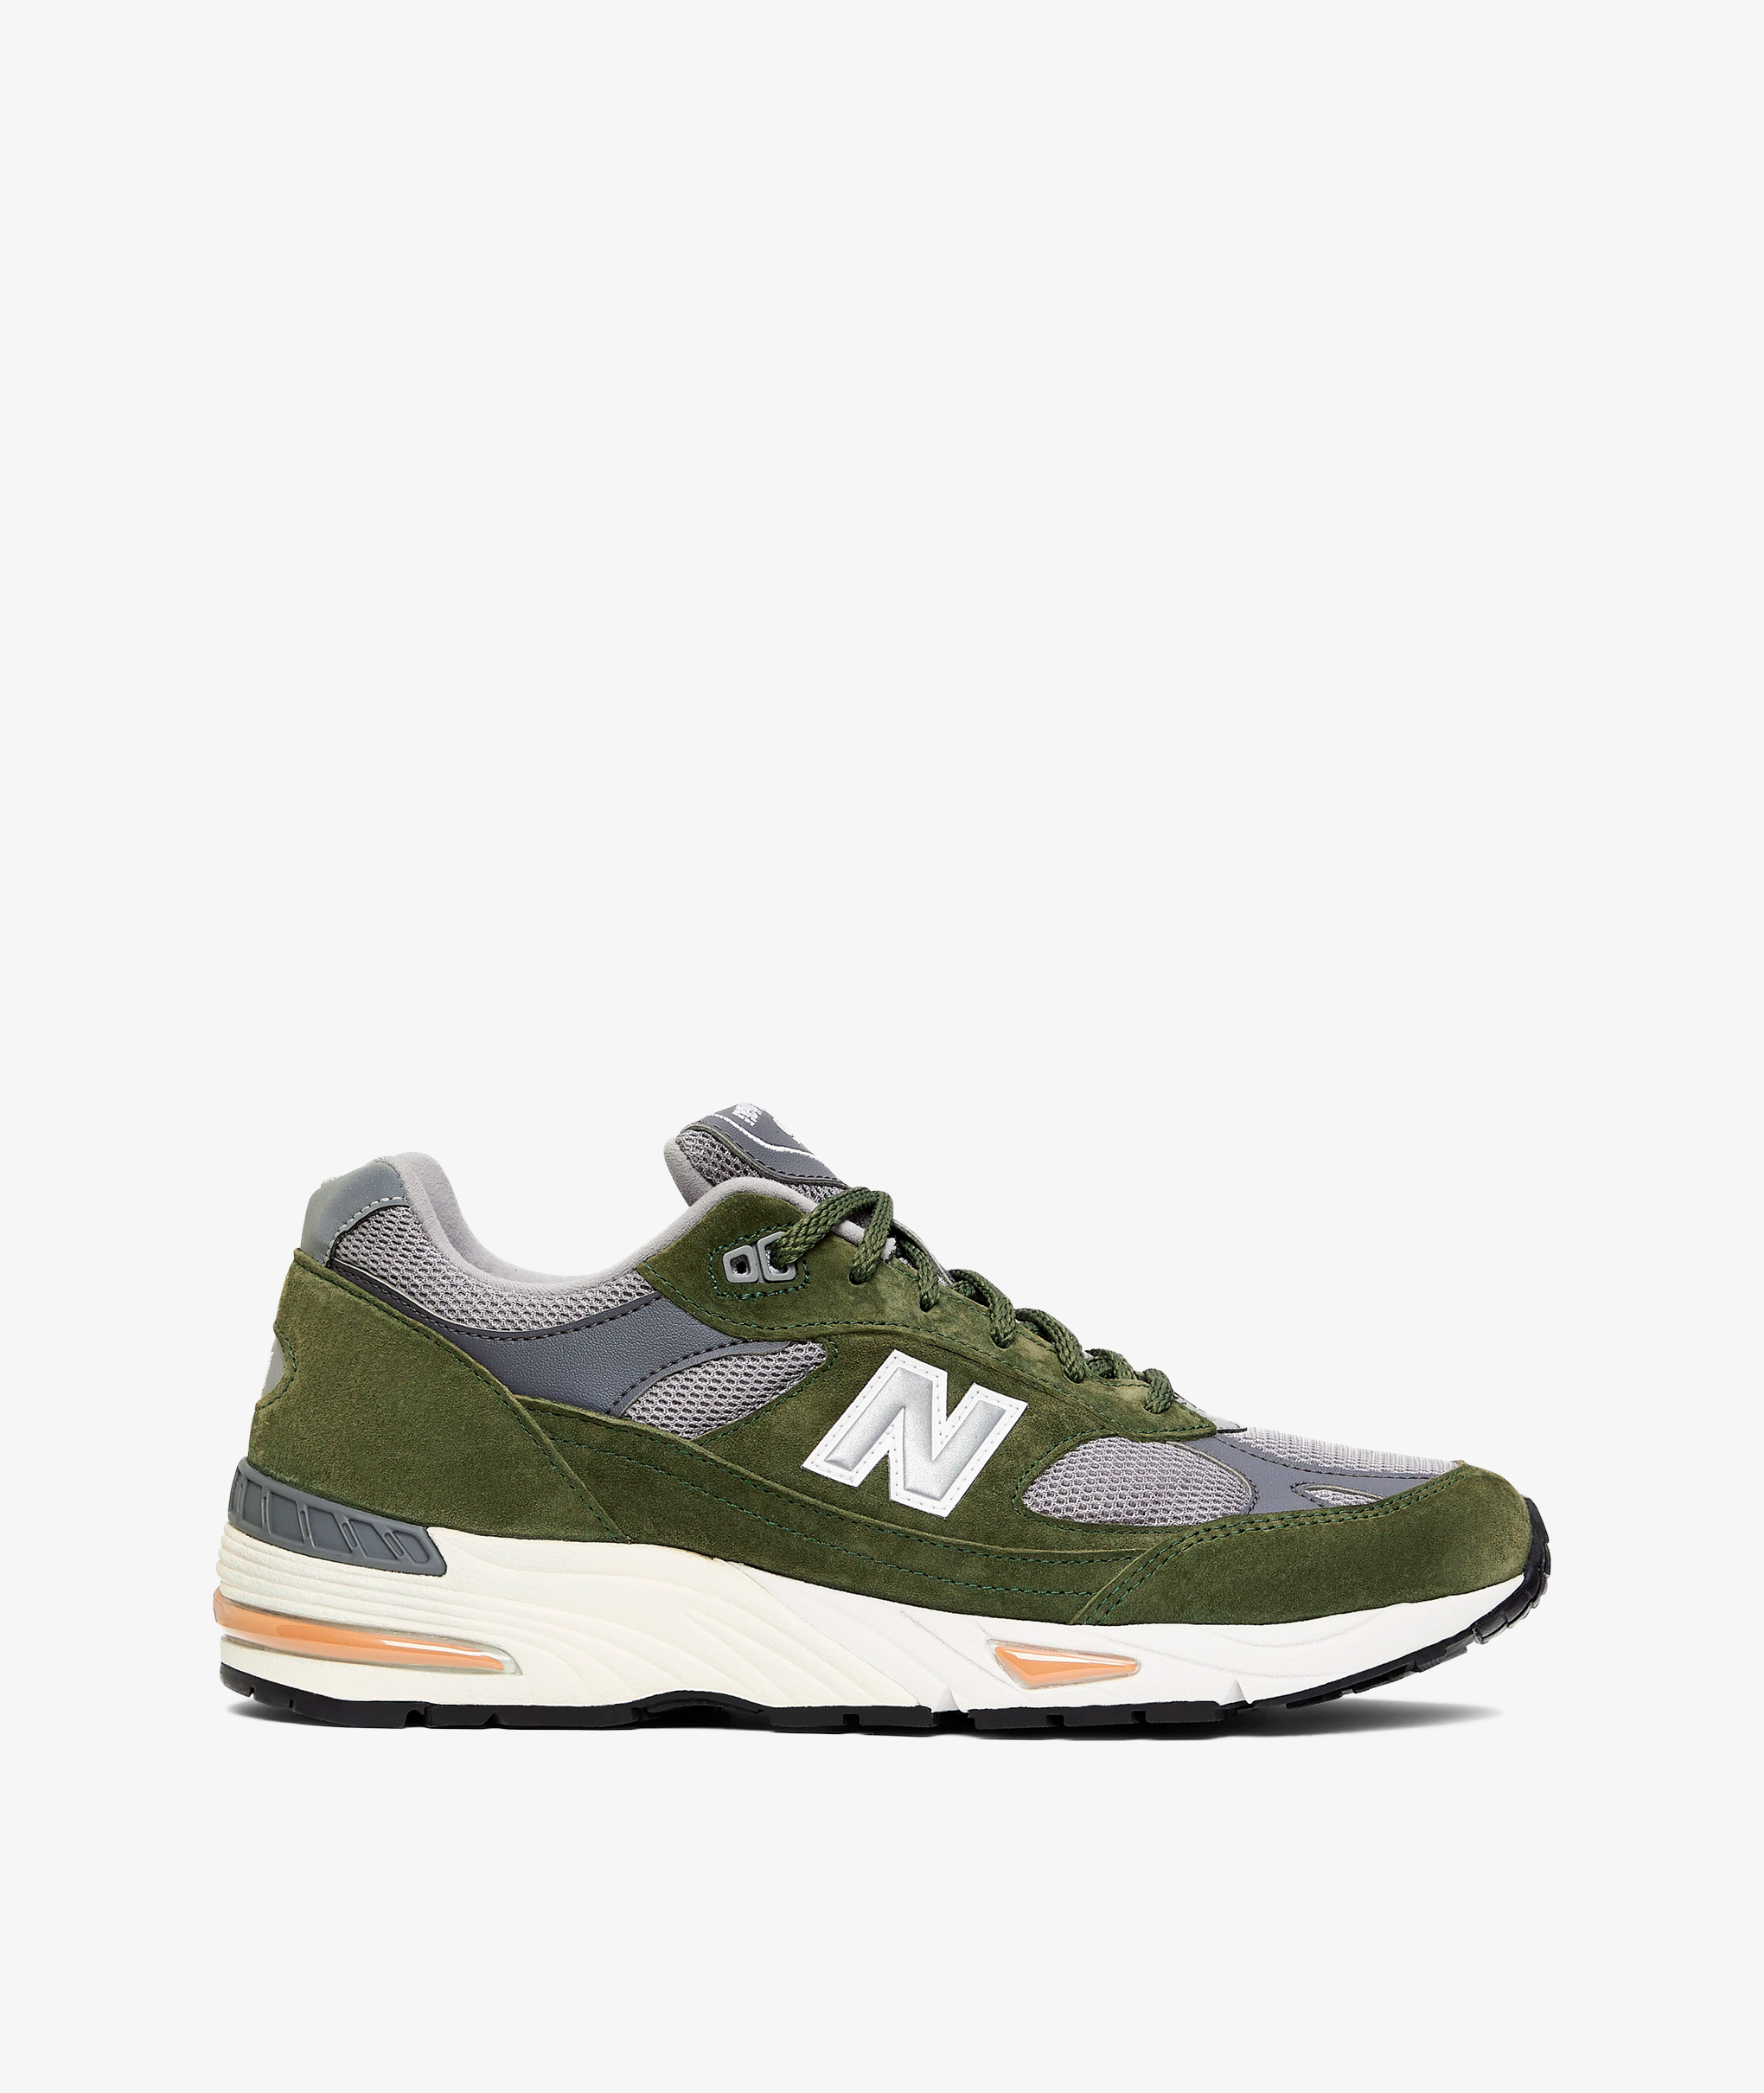 Norse Store | Shipping Worldwide - New Balance M991GGT - Green / Grey